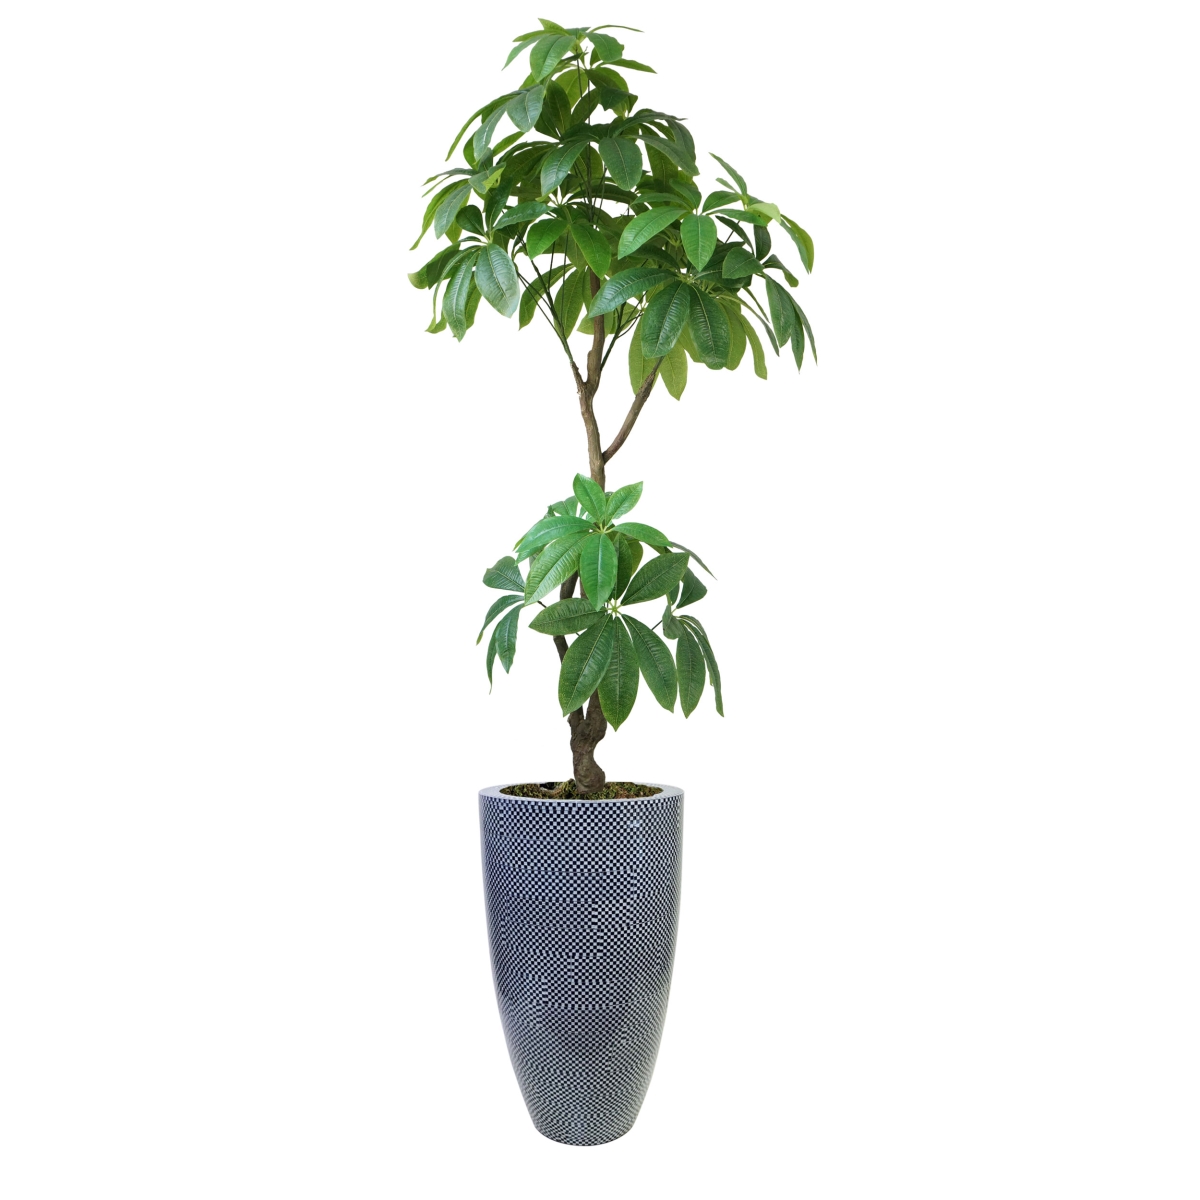 Vhx142223 53.5 In. Indoor & Outdoor Real Touch Pachira Aquatica Plant In Resin Planter